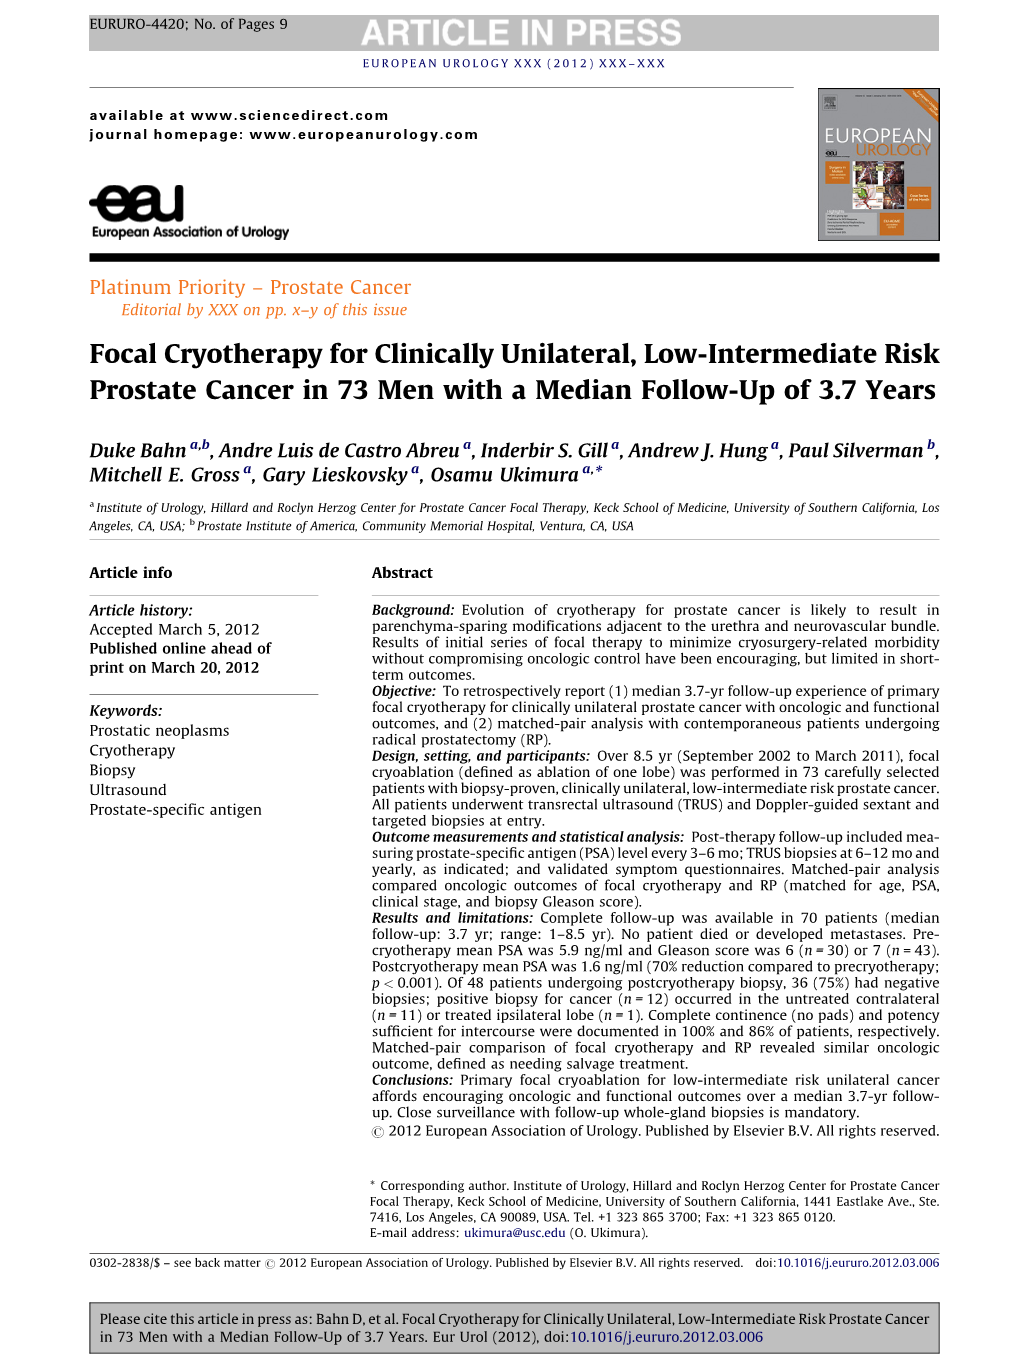 Focal Cryotherapy for Clinically Unilateral, Low-Intermediate Risk